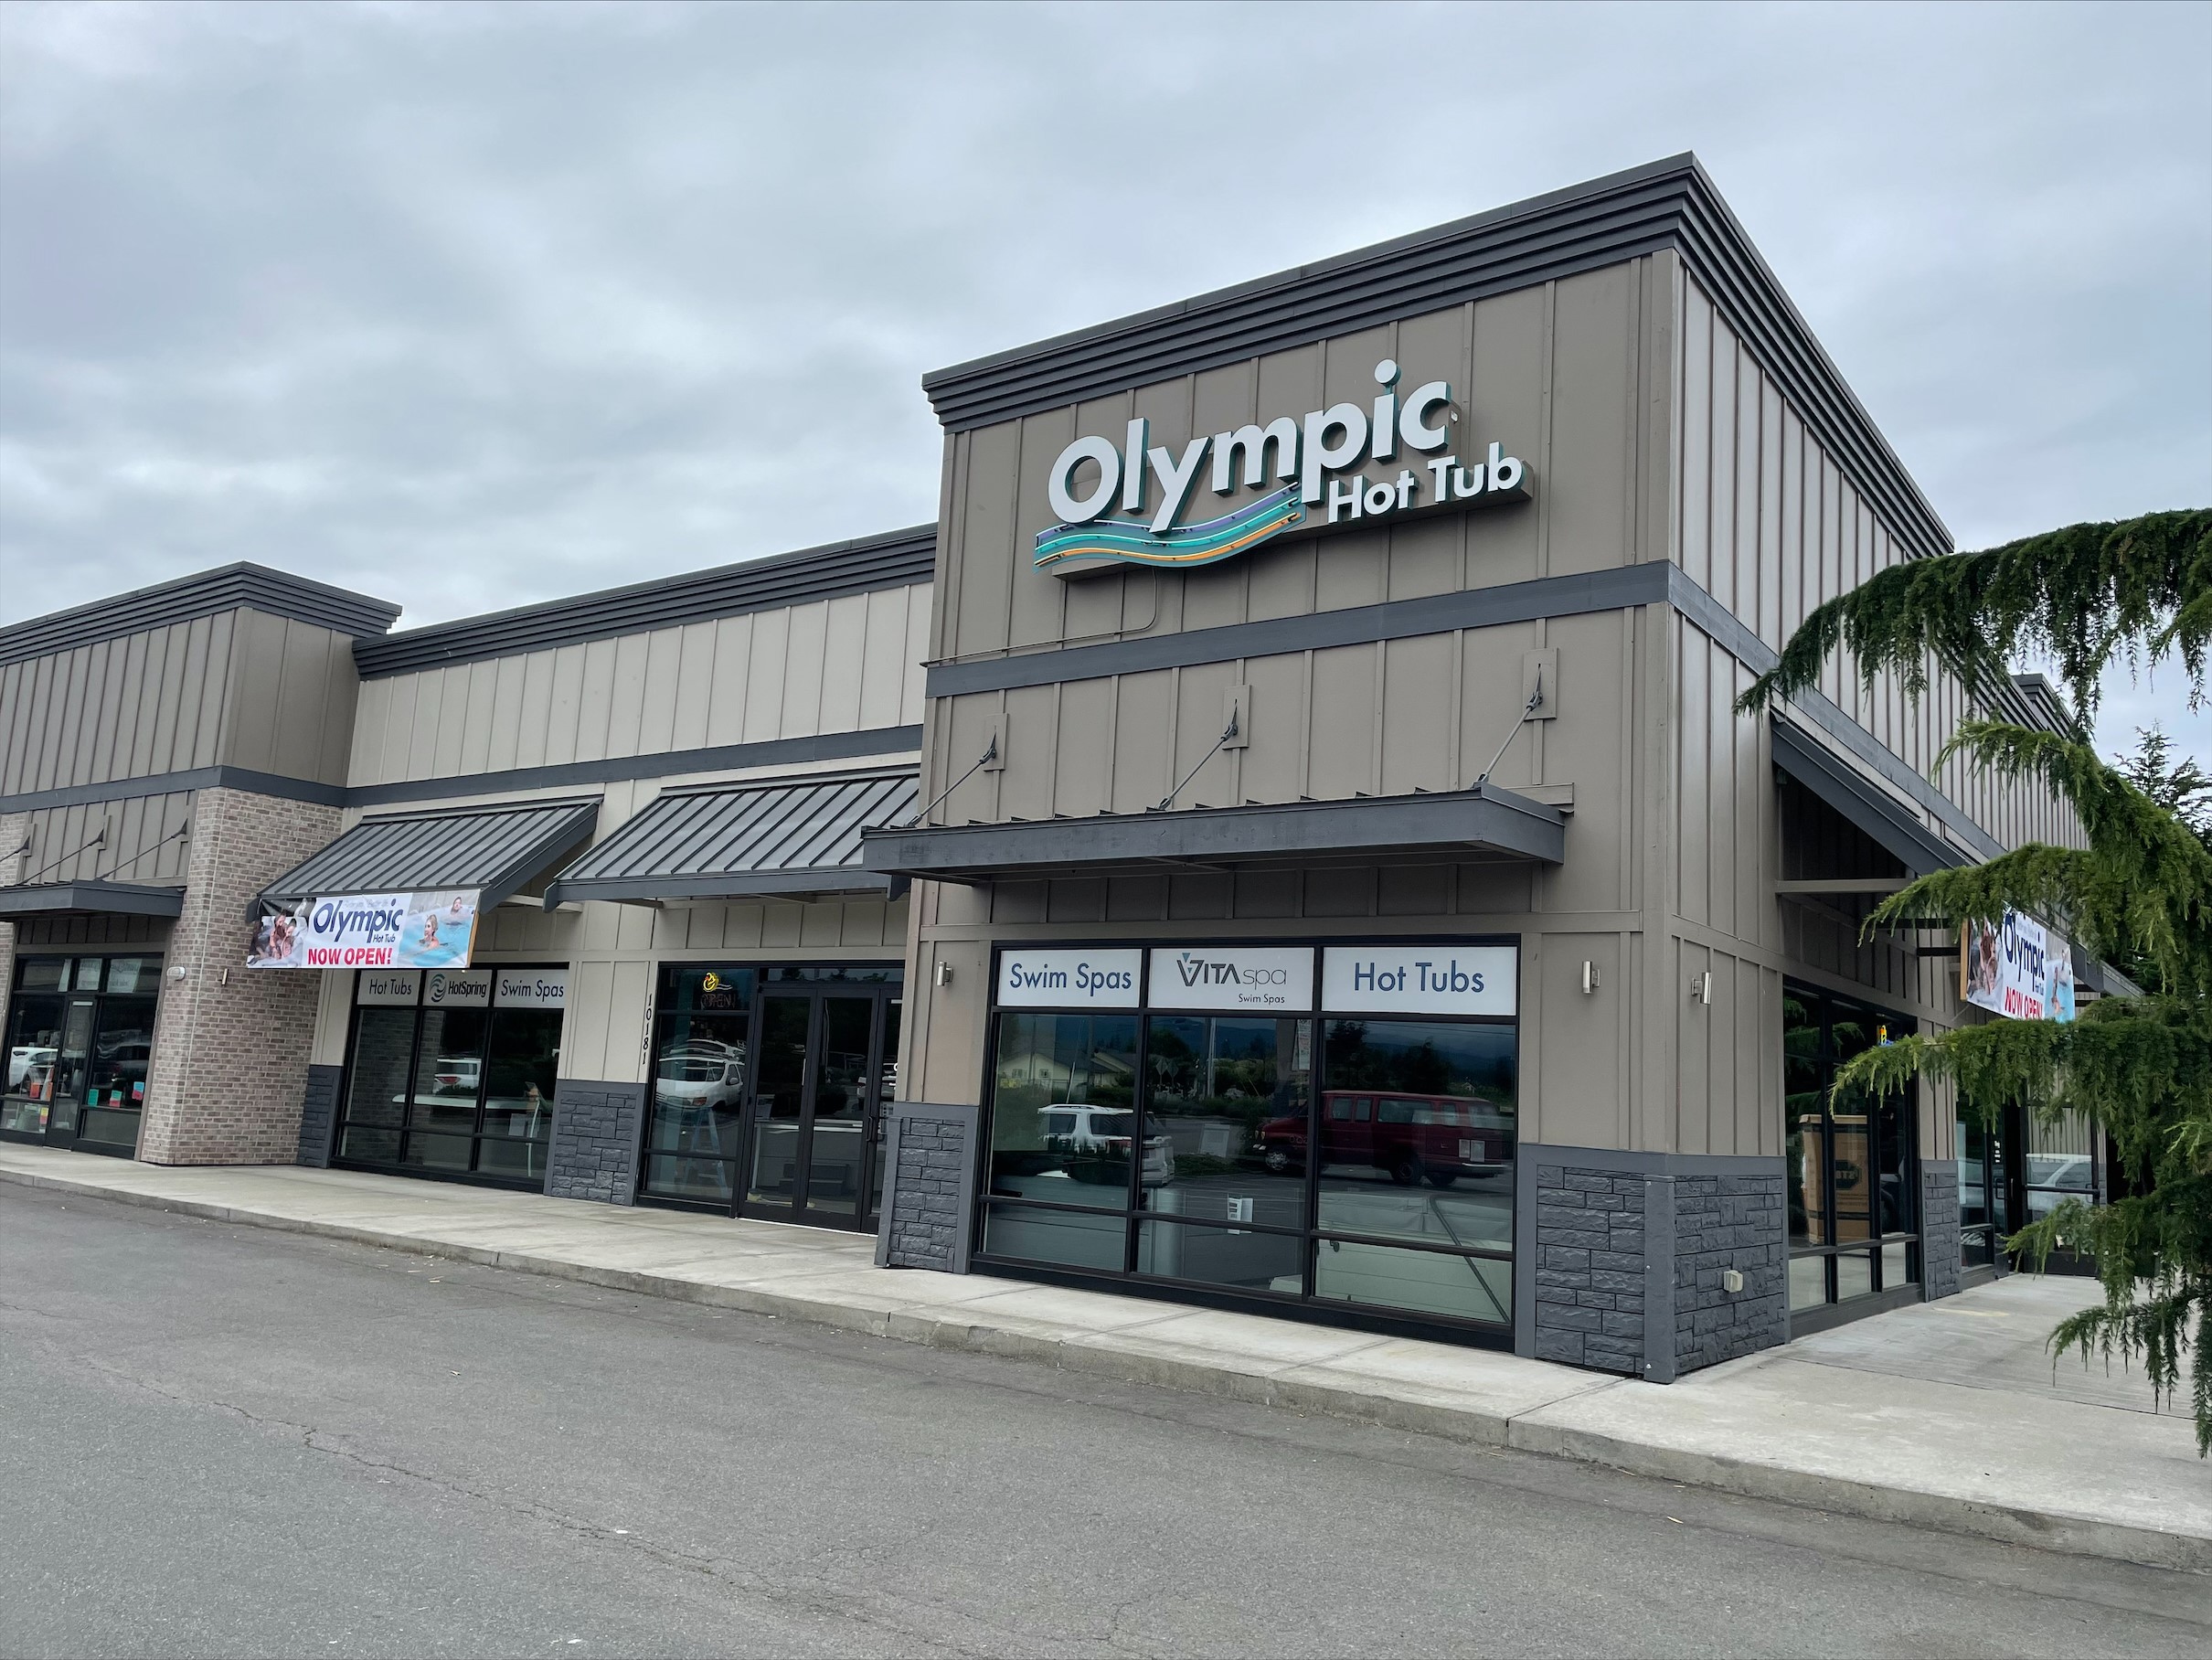 Olympic Hot Tub announces the Grand Opening of its 7th location in Sequim